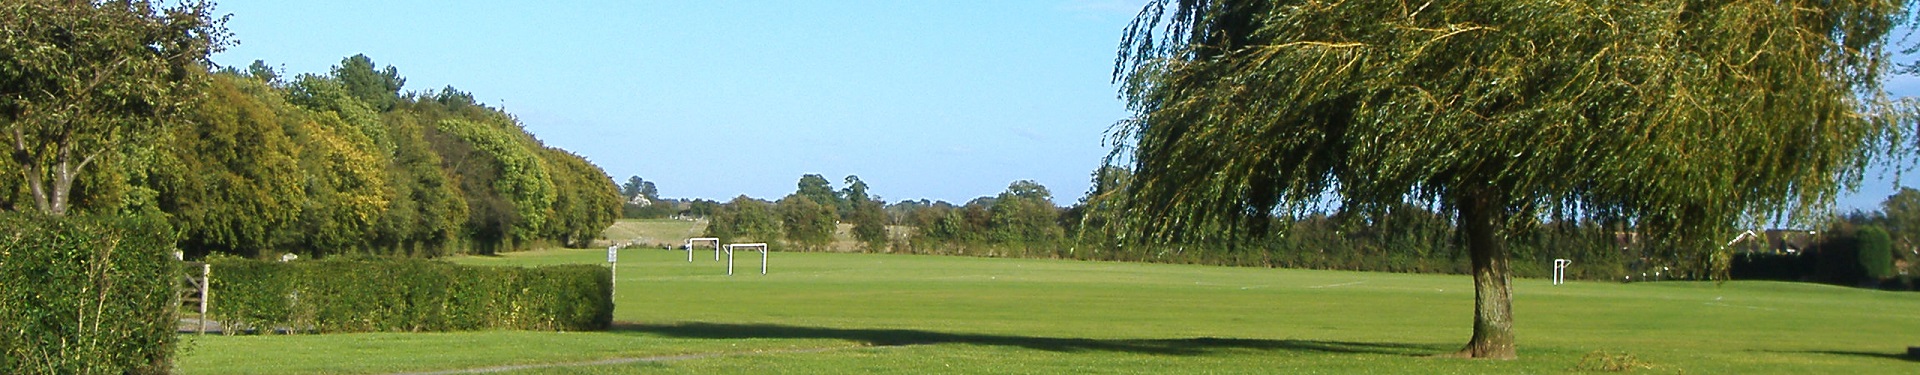 Image of playing field